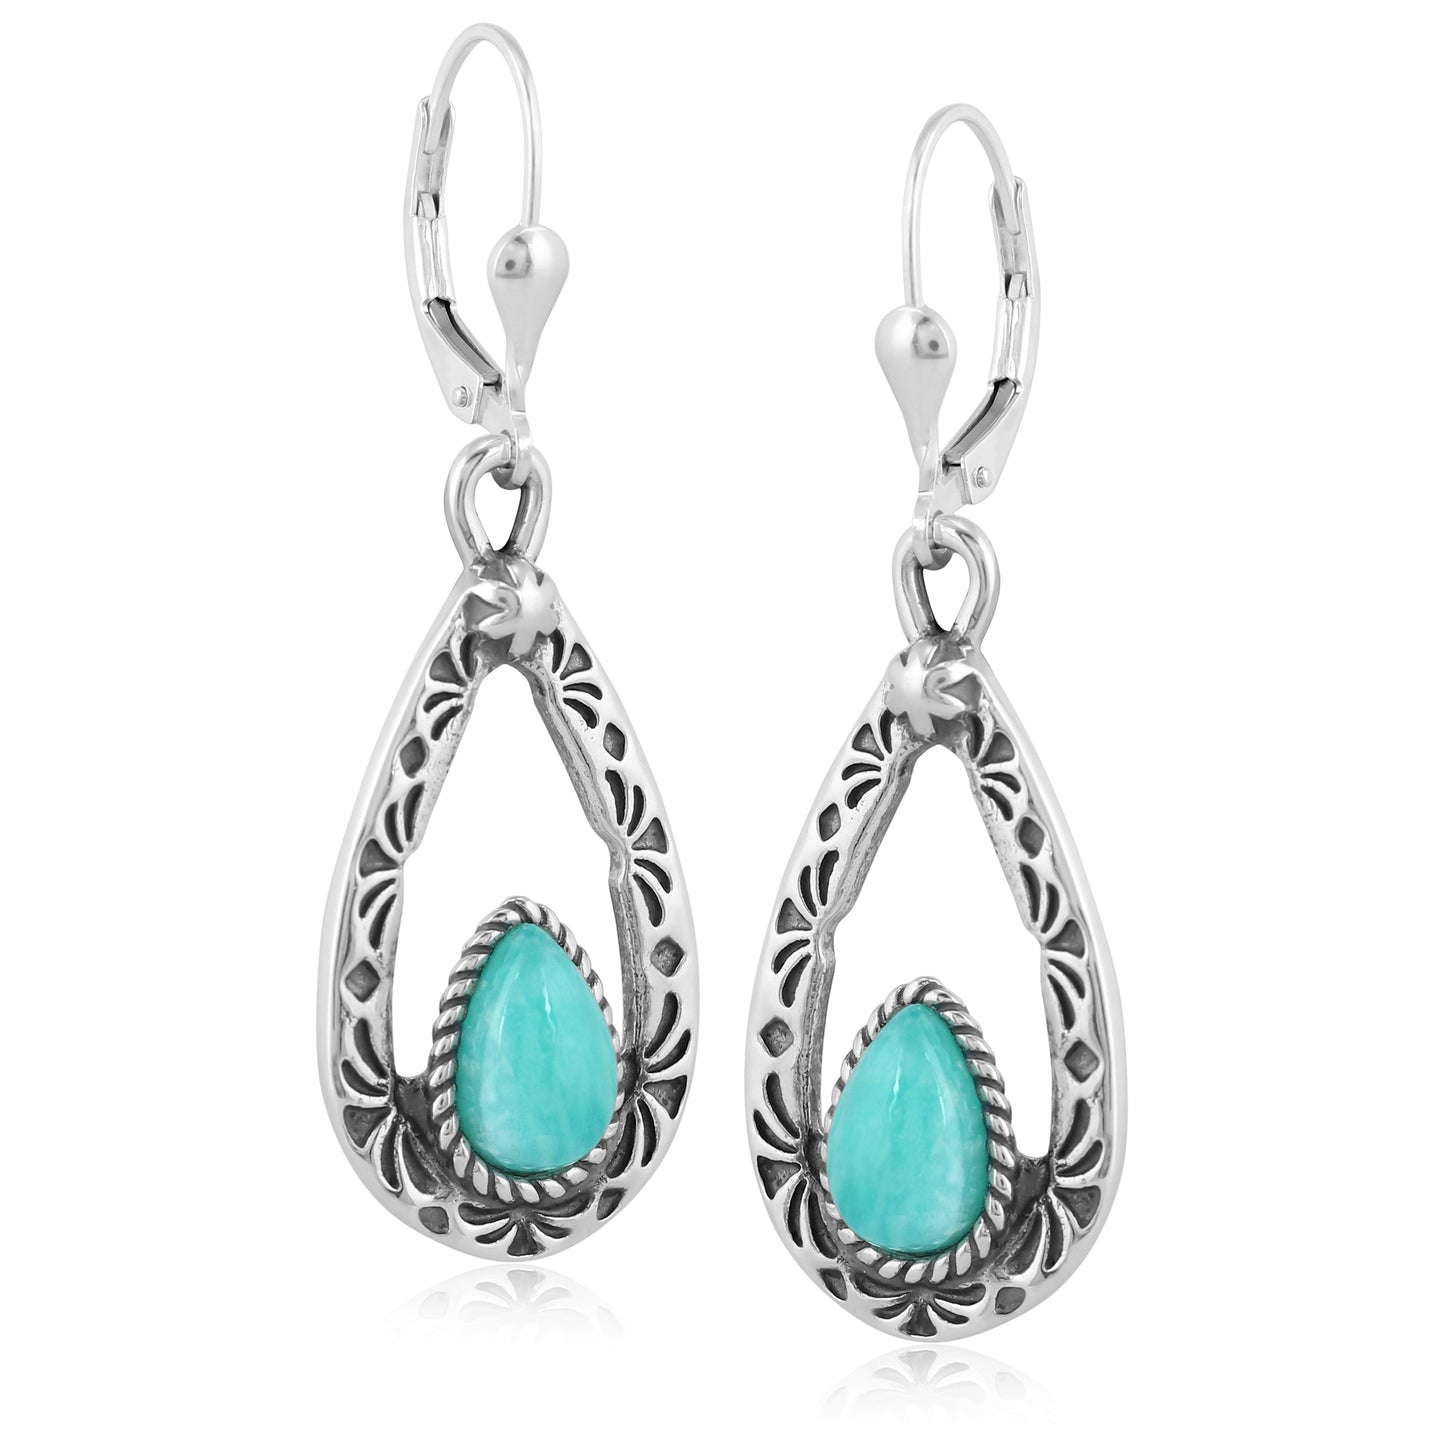 Southwestern Sterling Silver with Pear Shaped Amazonite Gemstone Drop and Dangle Earrings